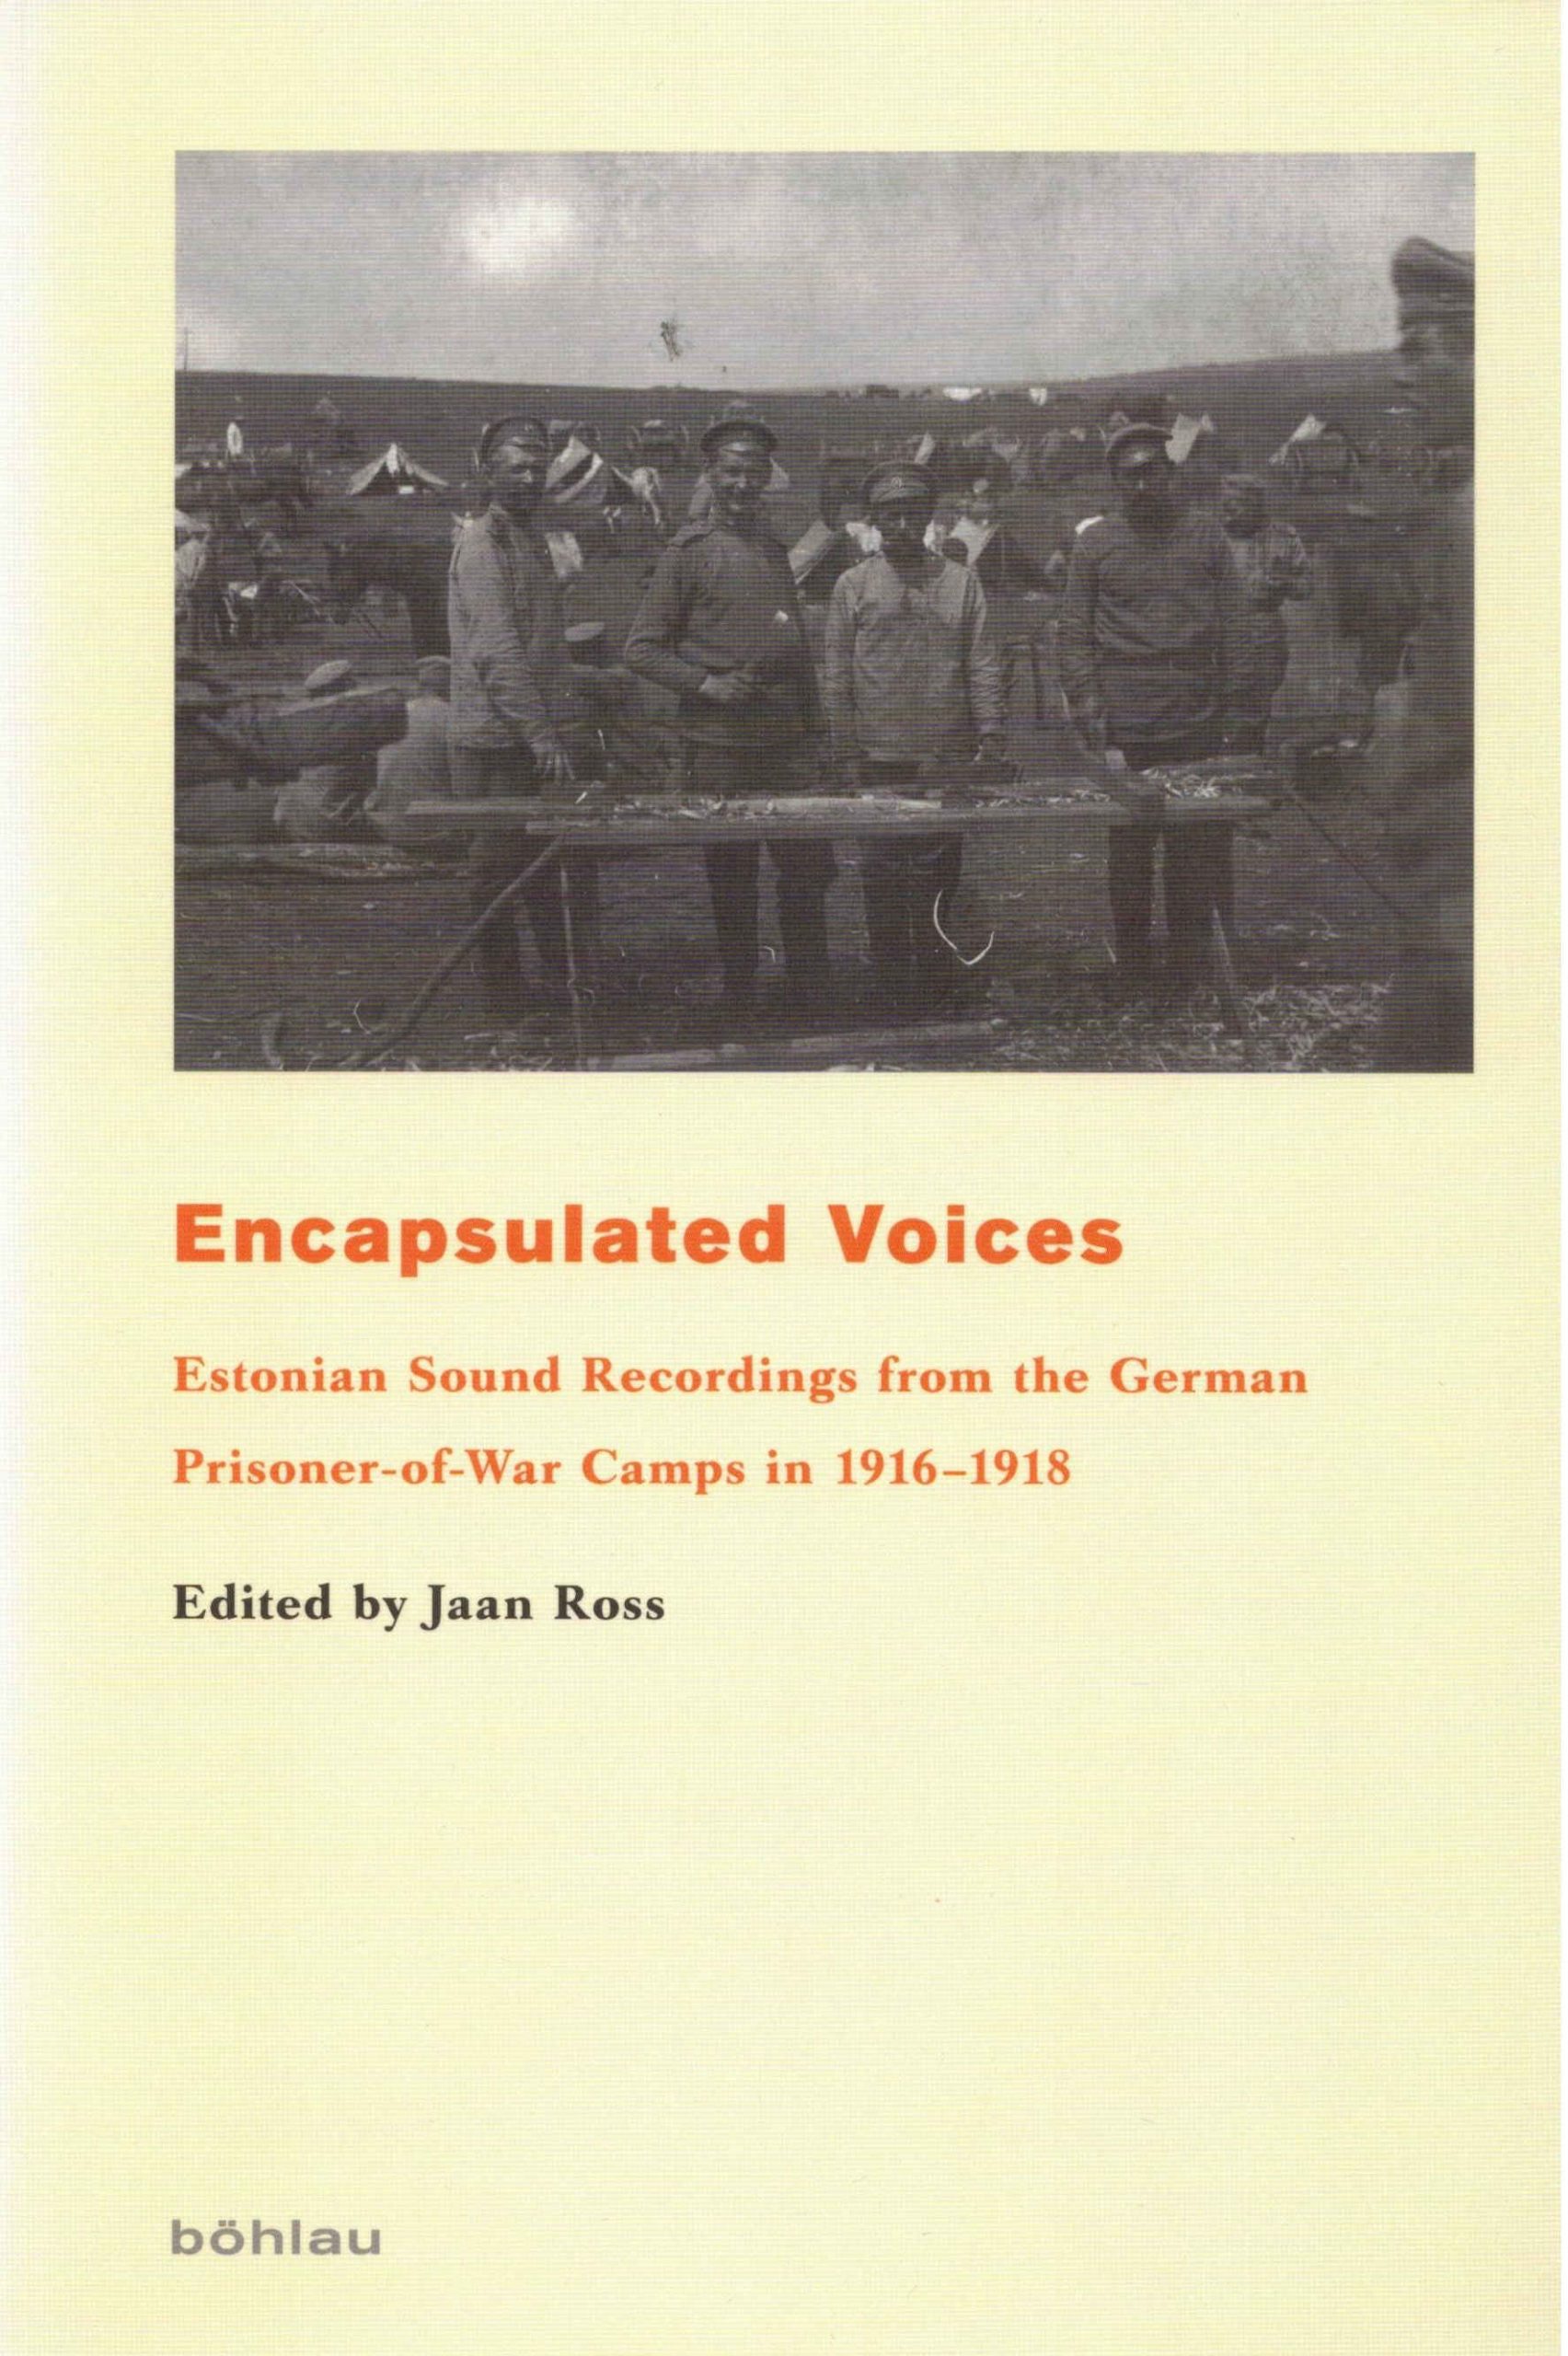 Band 05: Encapsulated Voices. Estonian Sound Recordings from the German Prisoner-of-War Camps in 1916-1918